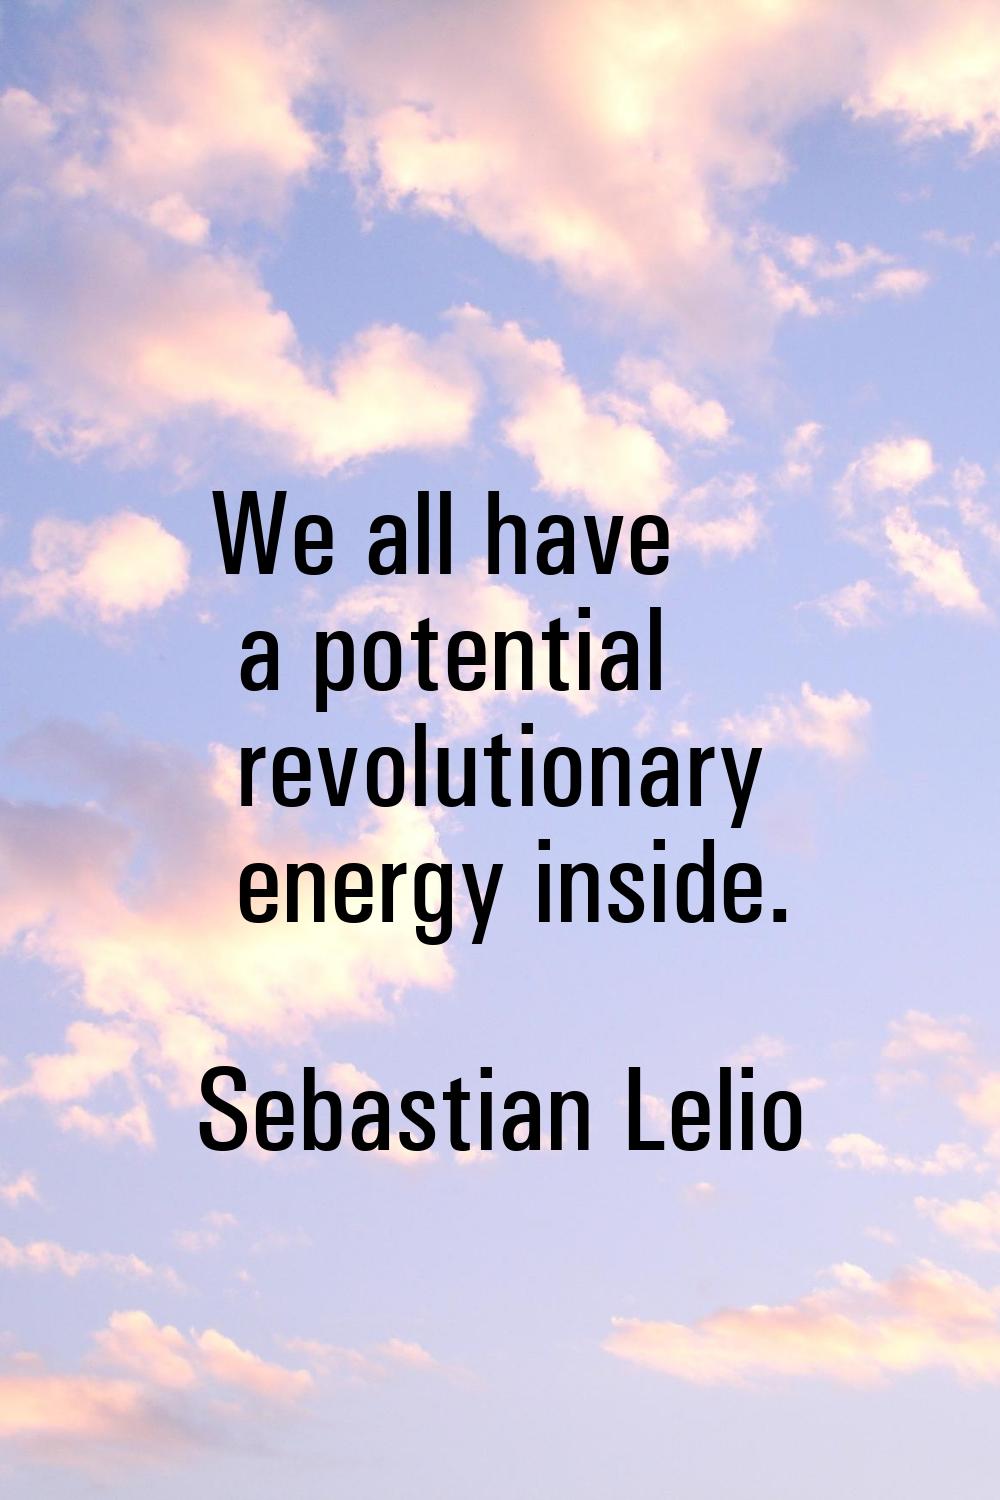 We all have a potential revolutionary energy inside.